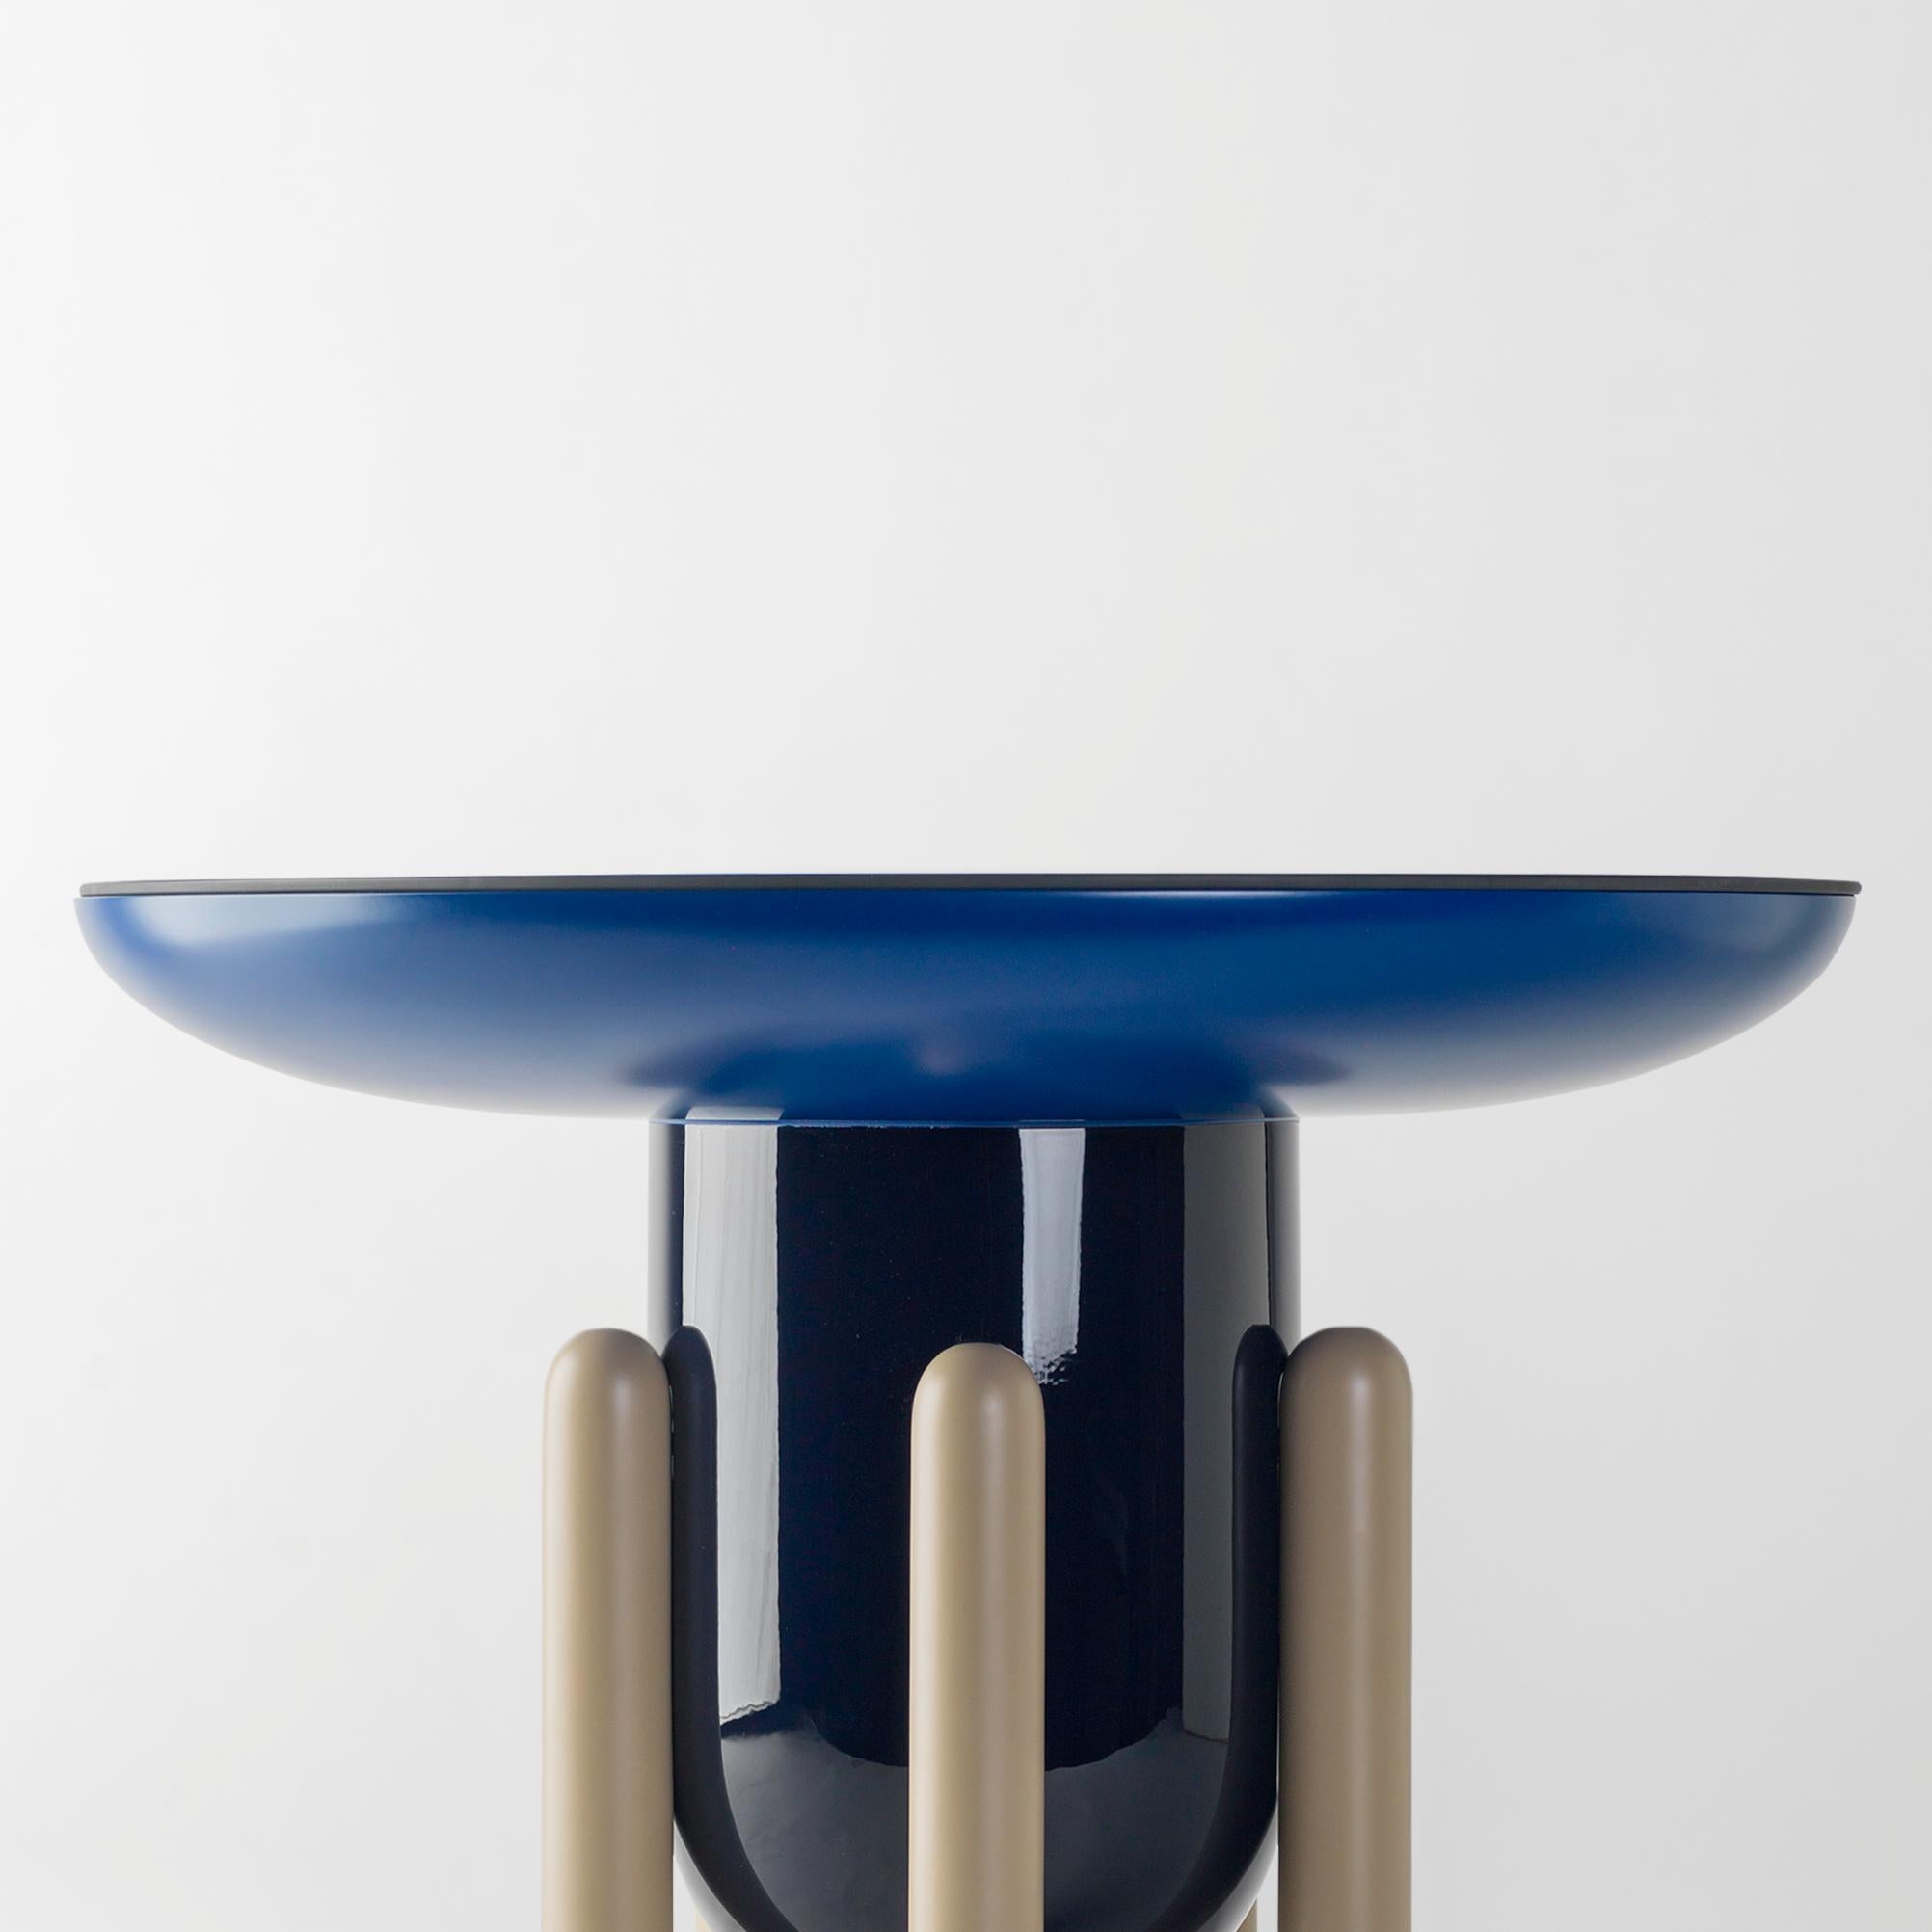 Multicolor Explorer # 02 Table

Design by Jaime Hayon, 2019
Manufactured by BD Barcelona.

Laquered fibreglass body. Solid turned wooden legs and lacquered. Painted glass tabletop.

Measures: 60 Ø x 46 cm

- Glass: RAL 7021
- Top: RAL 5002